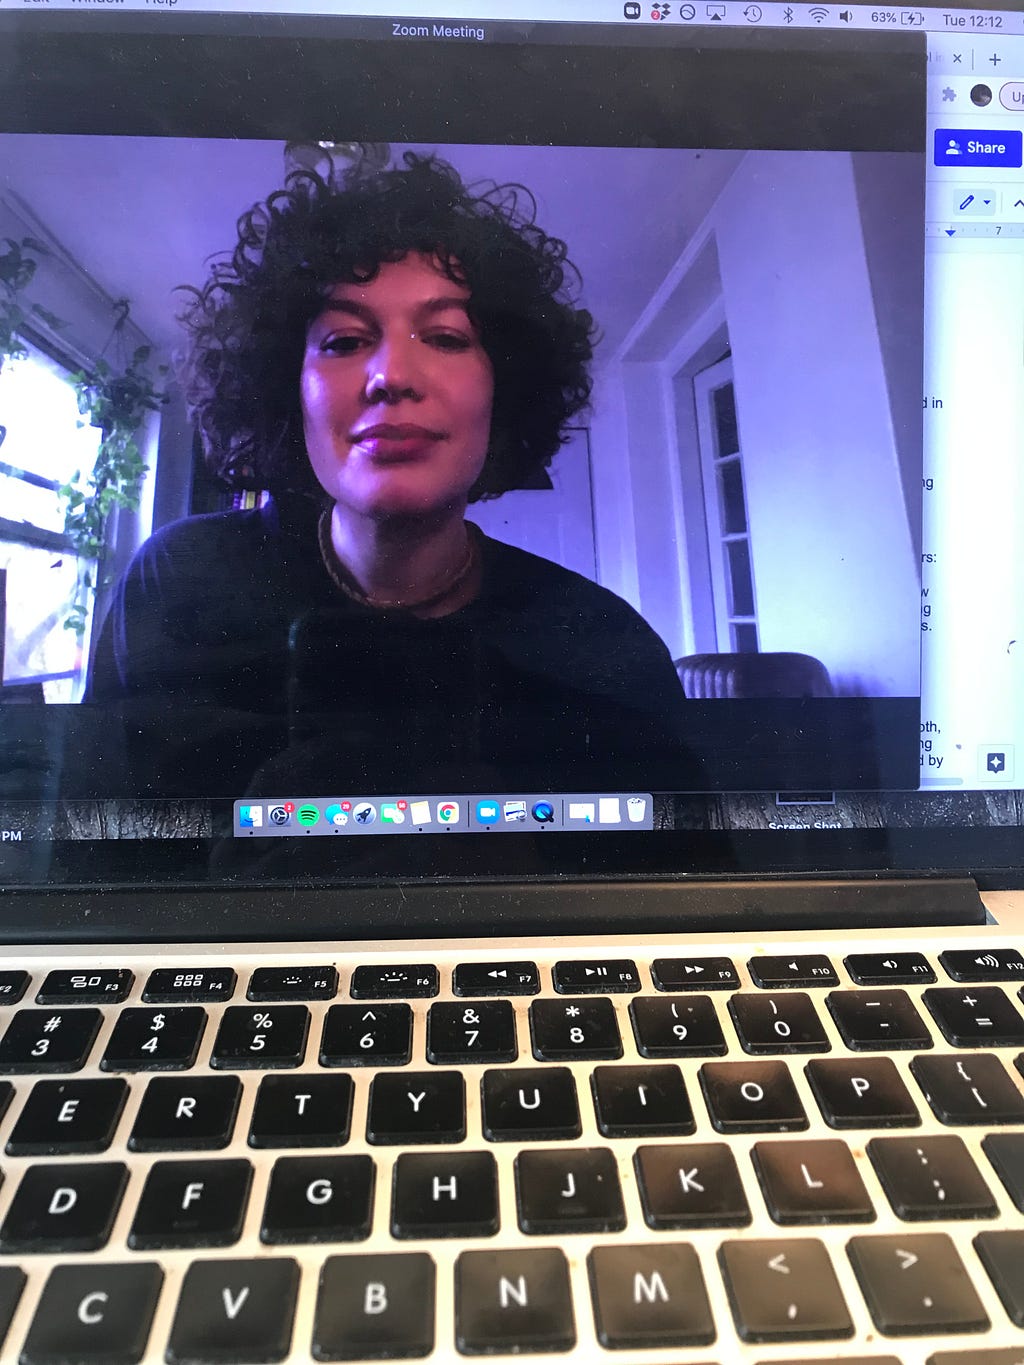 A macbook with the screen displaying a web browser with multiple tabs open in the background. In the foreground of the image is Coralys Carter, light-skinned with chin length dark brown hair and a black t-shirt with a thick gold chain, waiting to enter a Zoom meeting.